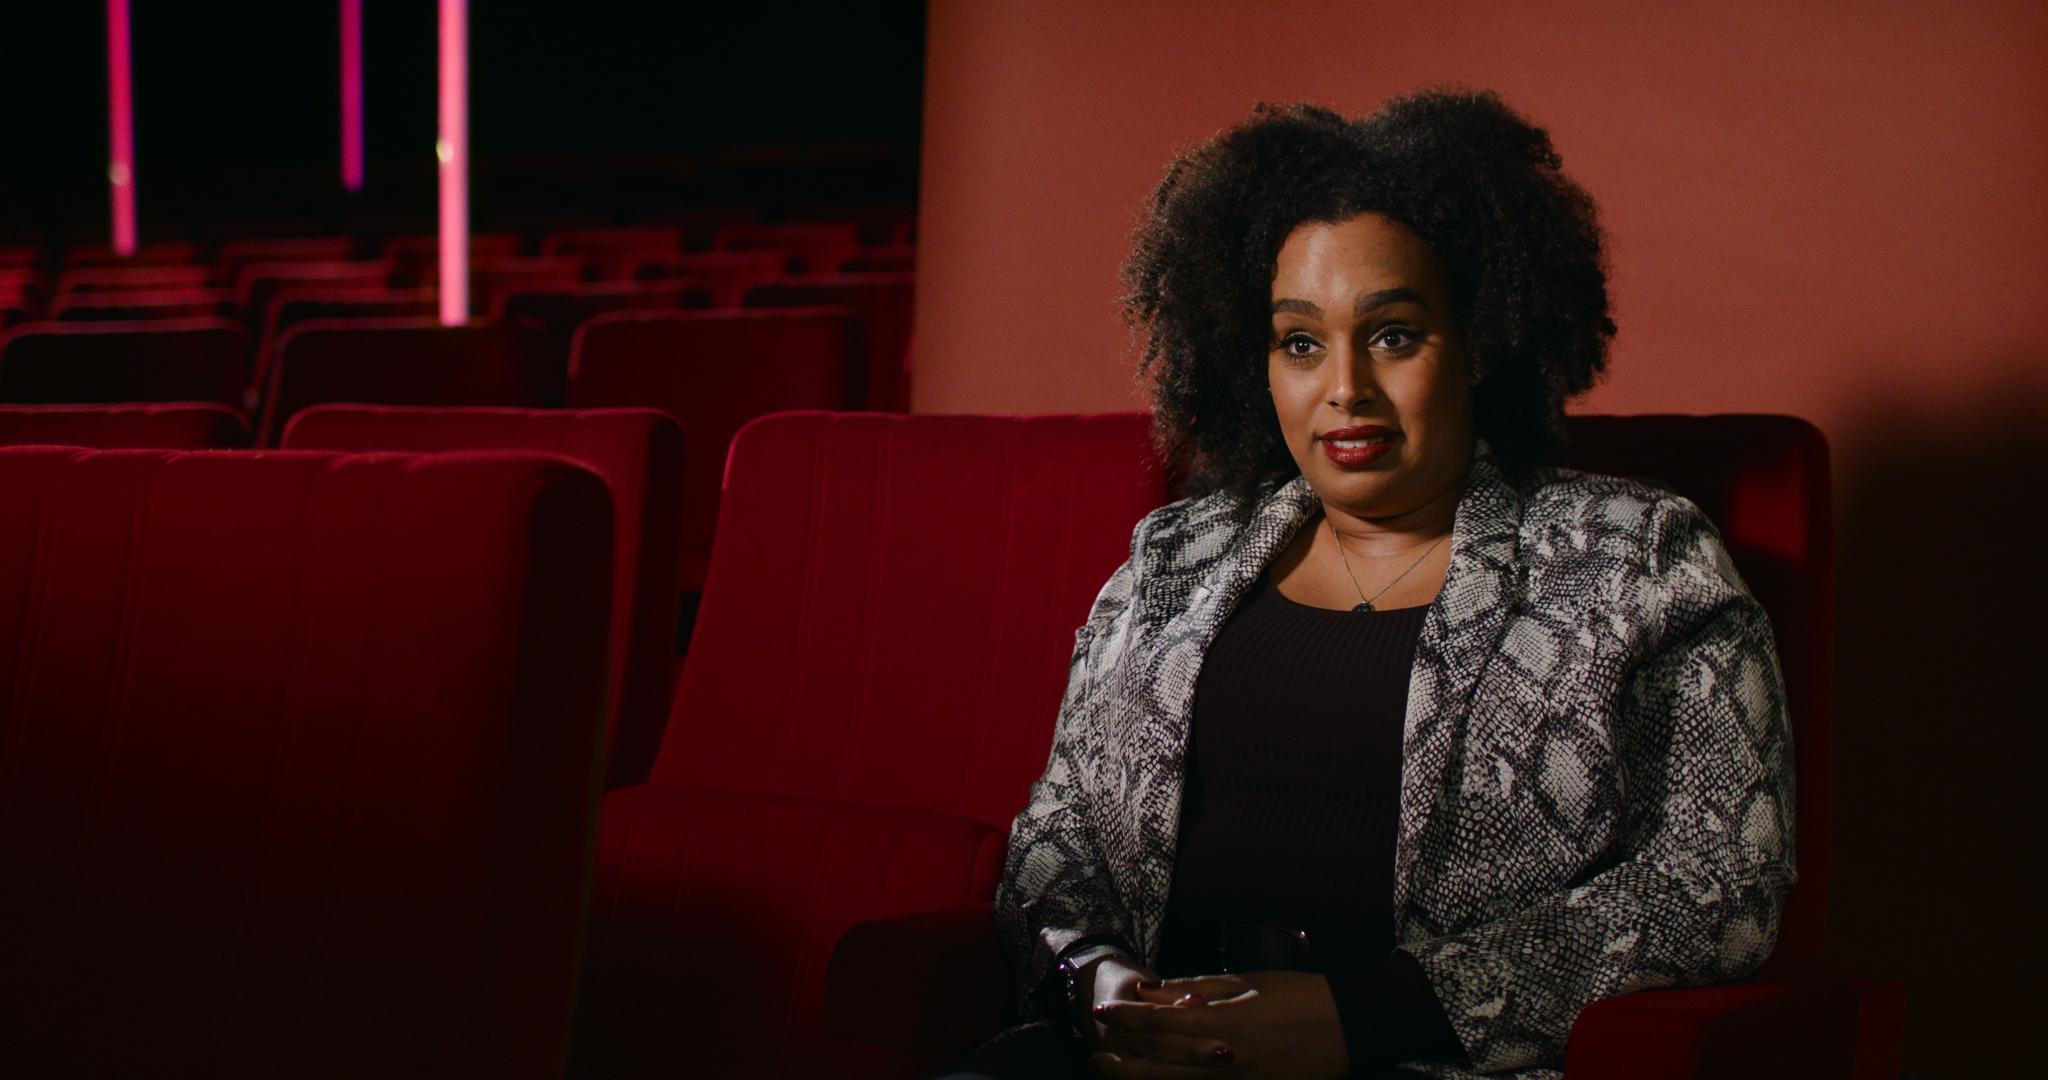 Still from Momentum. Mikal is sitting in a cinema chair with a red background set up; it's obviously in an interview setting.